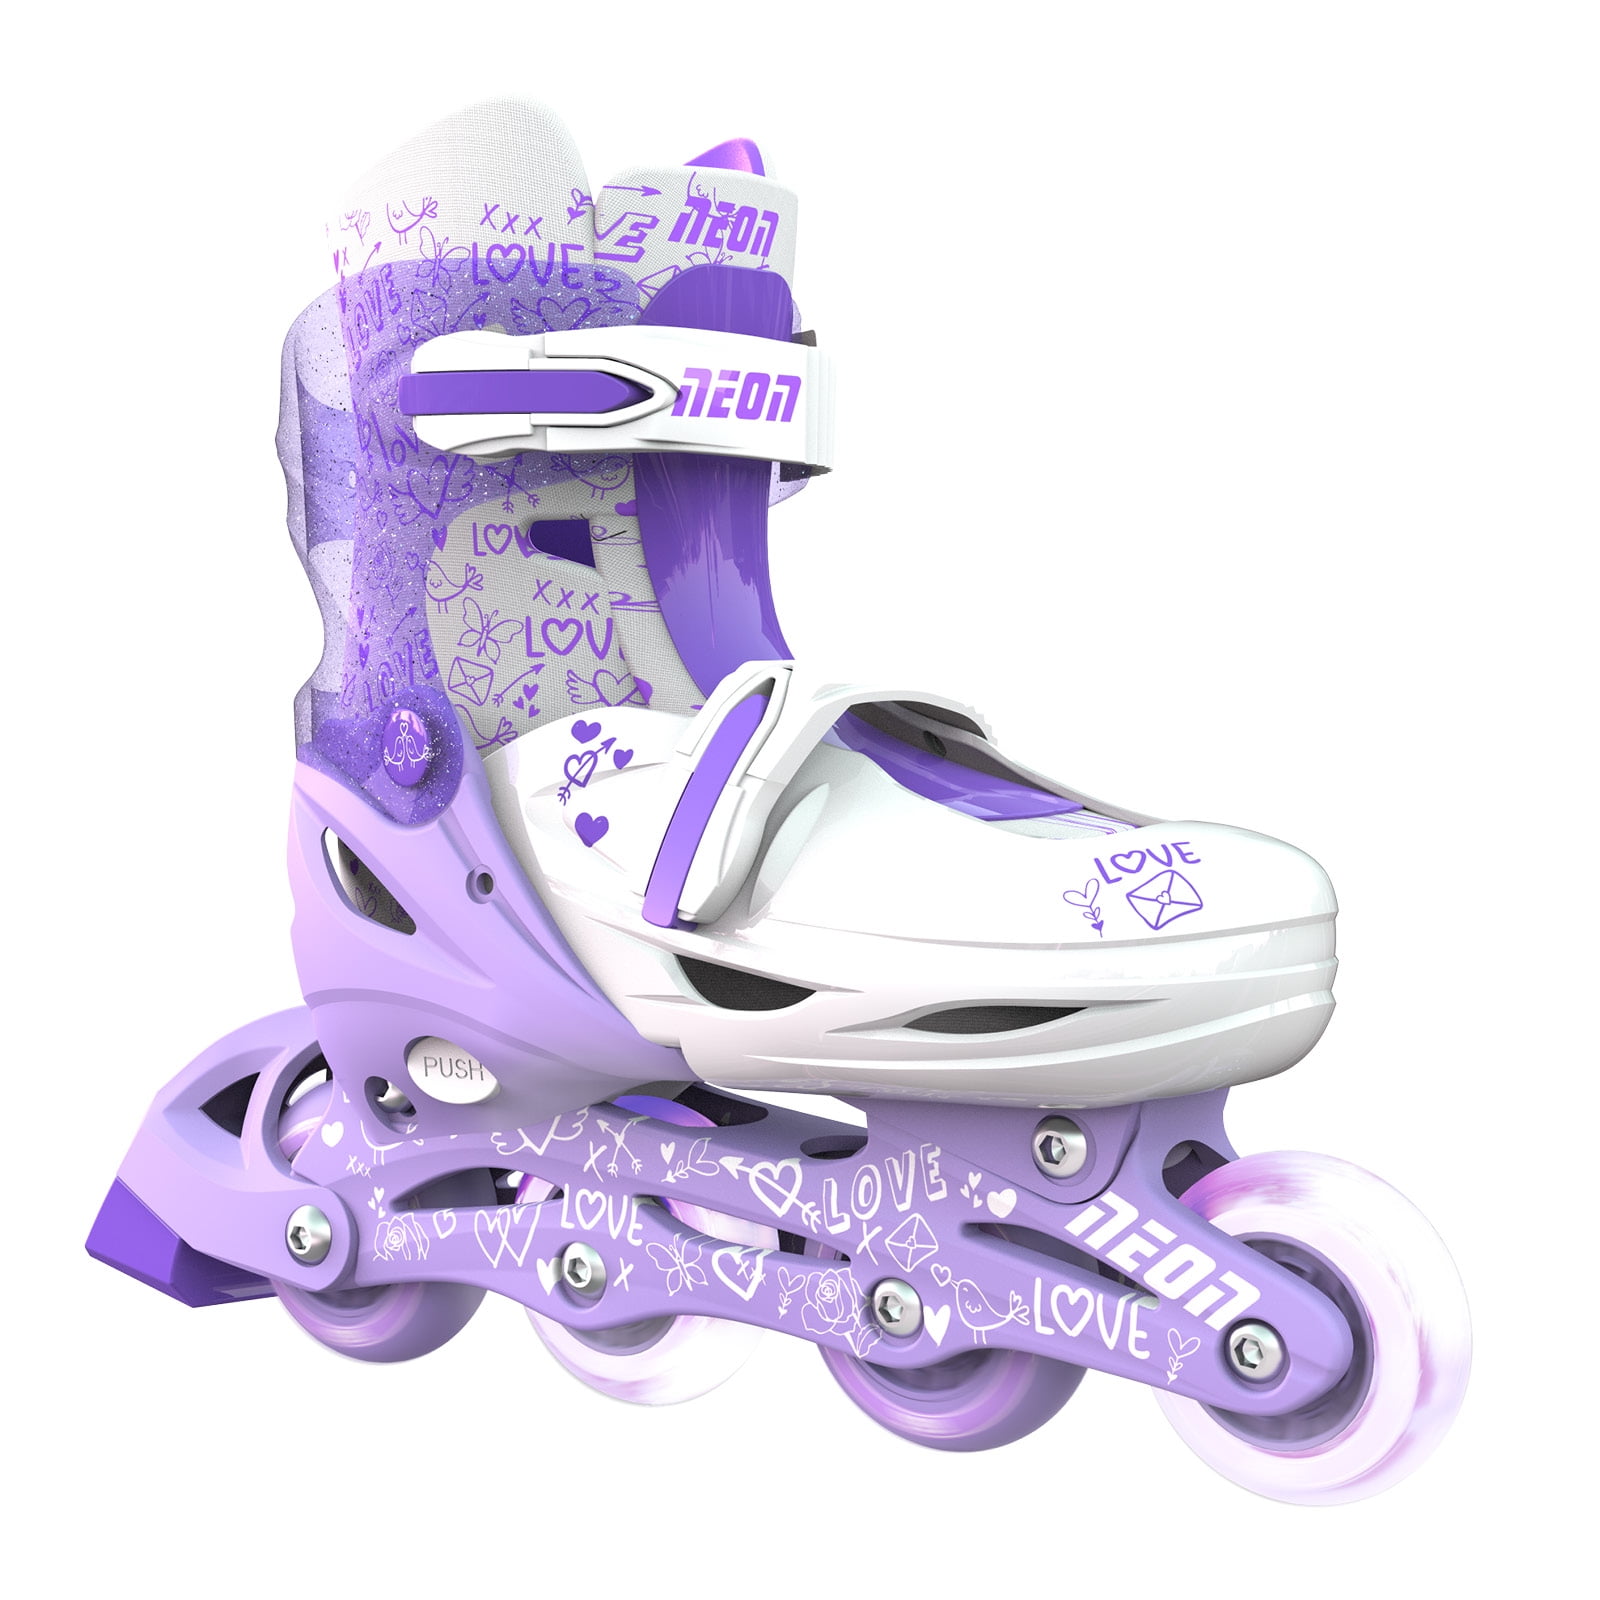 Roces Kid's Orlando Fitness Inline Skates Blades Color Choices 400687 